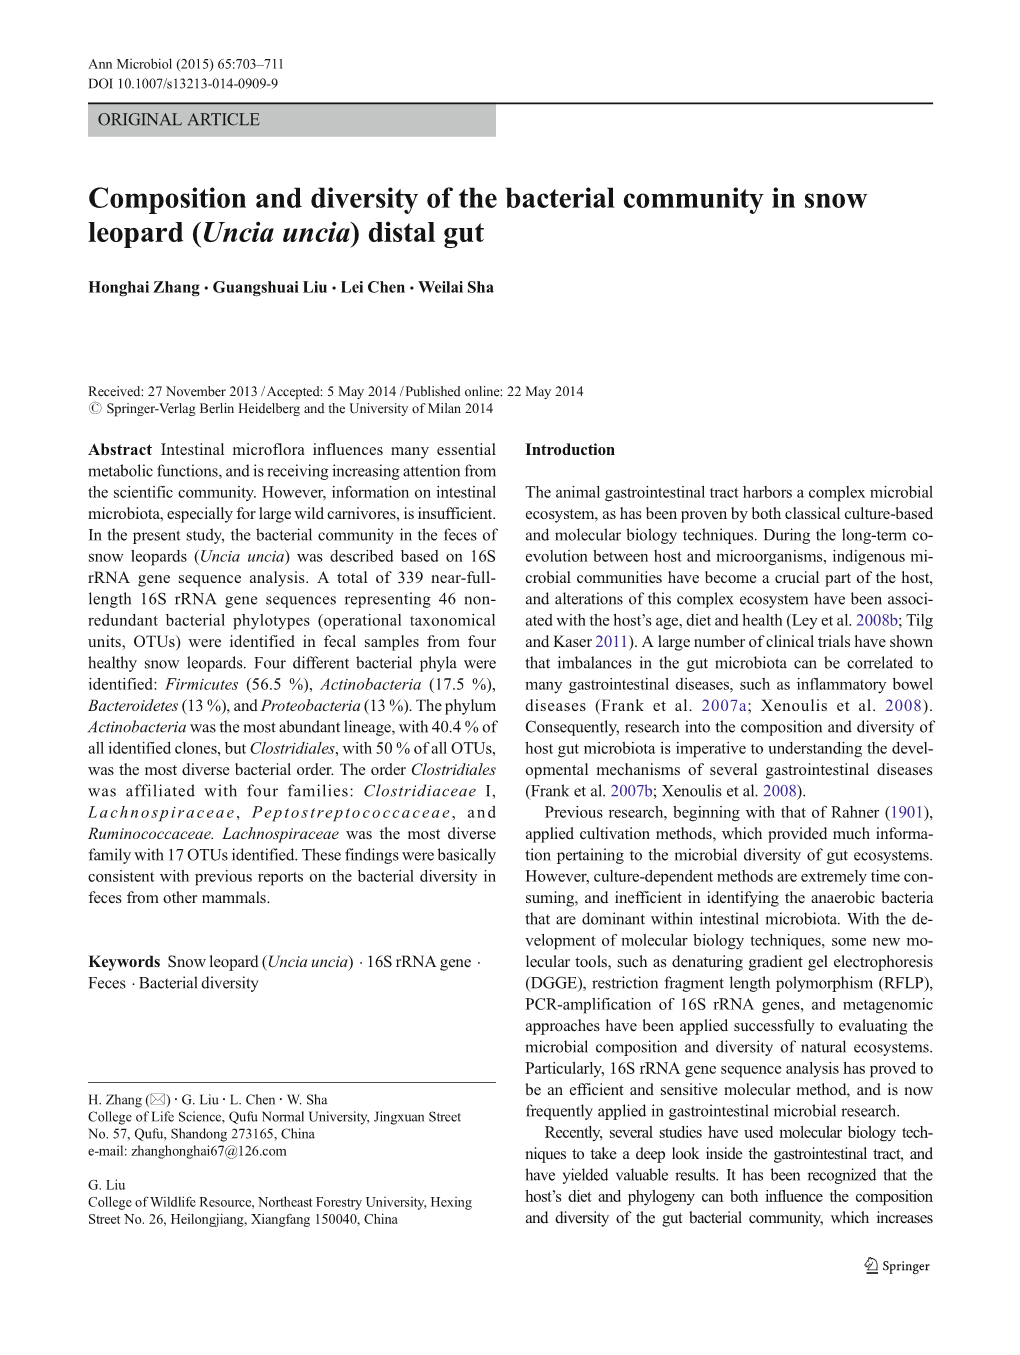 Composition and Diversity of the Bacterial Community in Snow Leopard (Uncia Uncia) Distal Gut